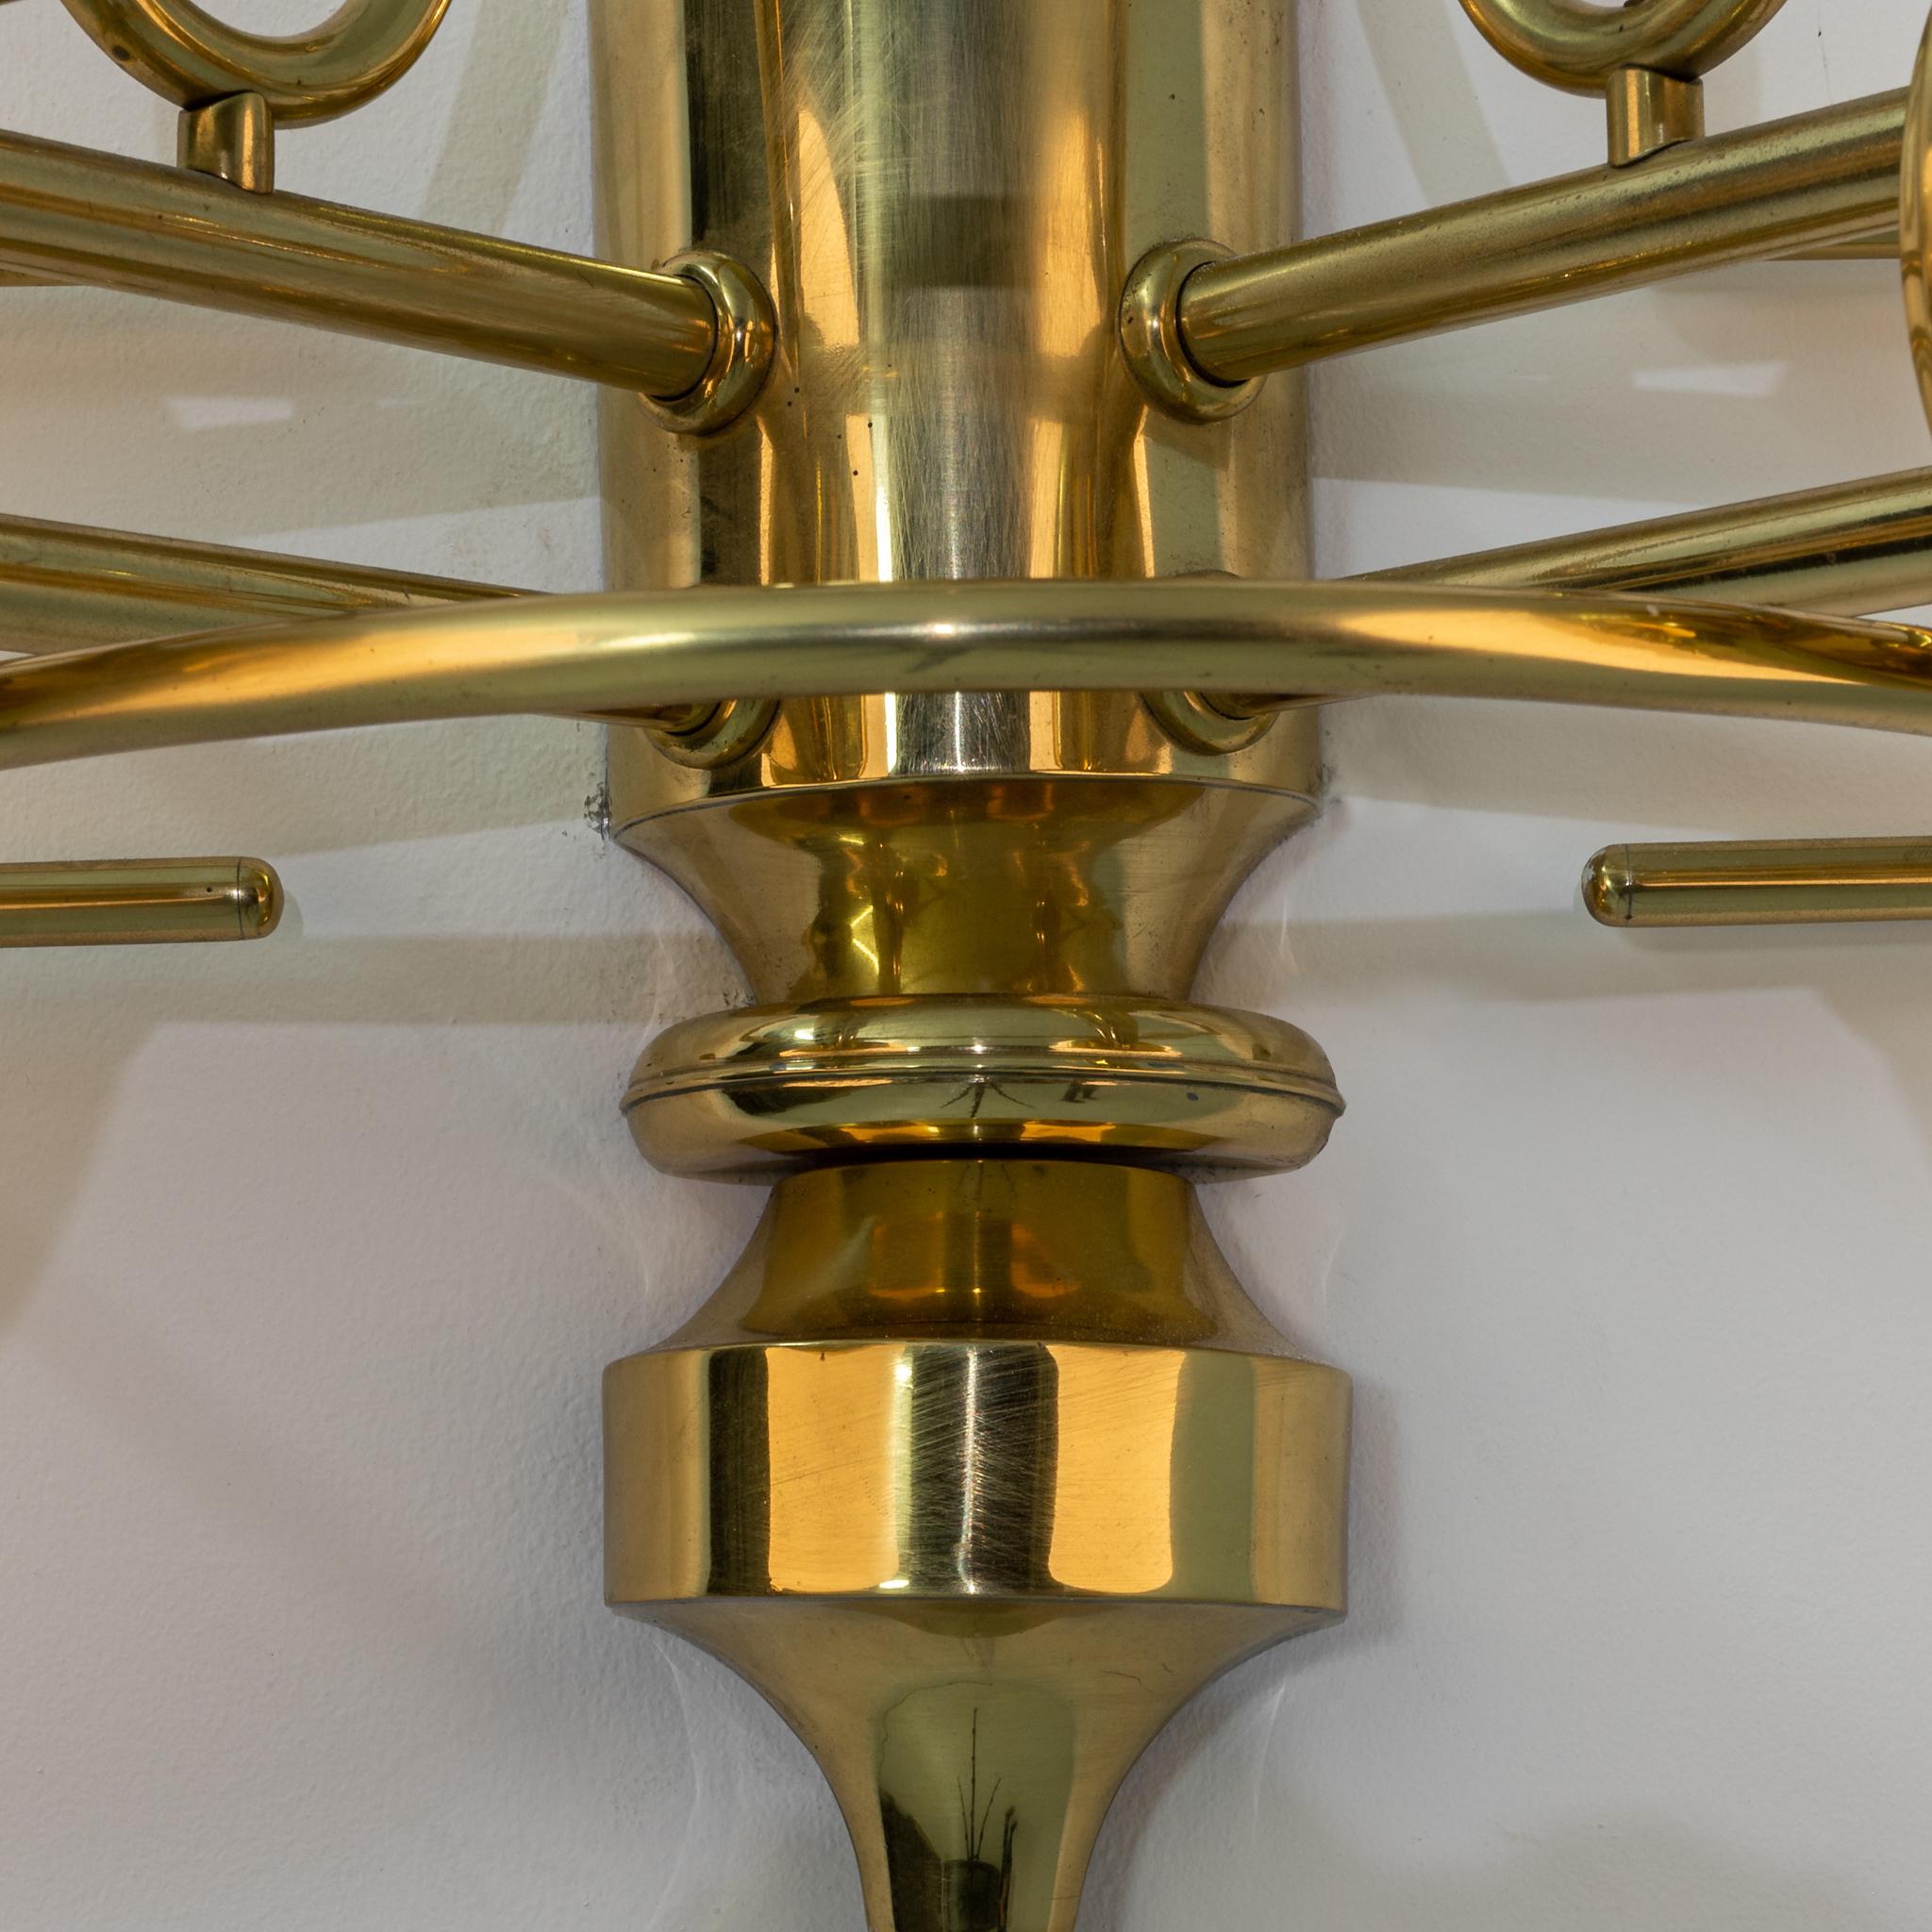 20th Century Czechia Brass Wall Sconce In Good Condition For Sale In High Point, NC